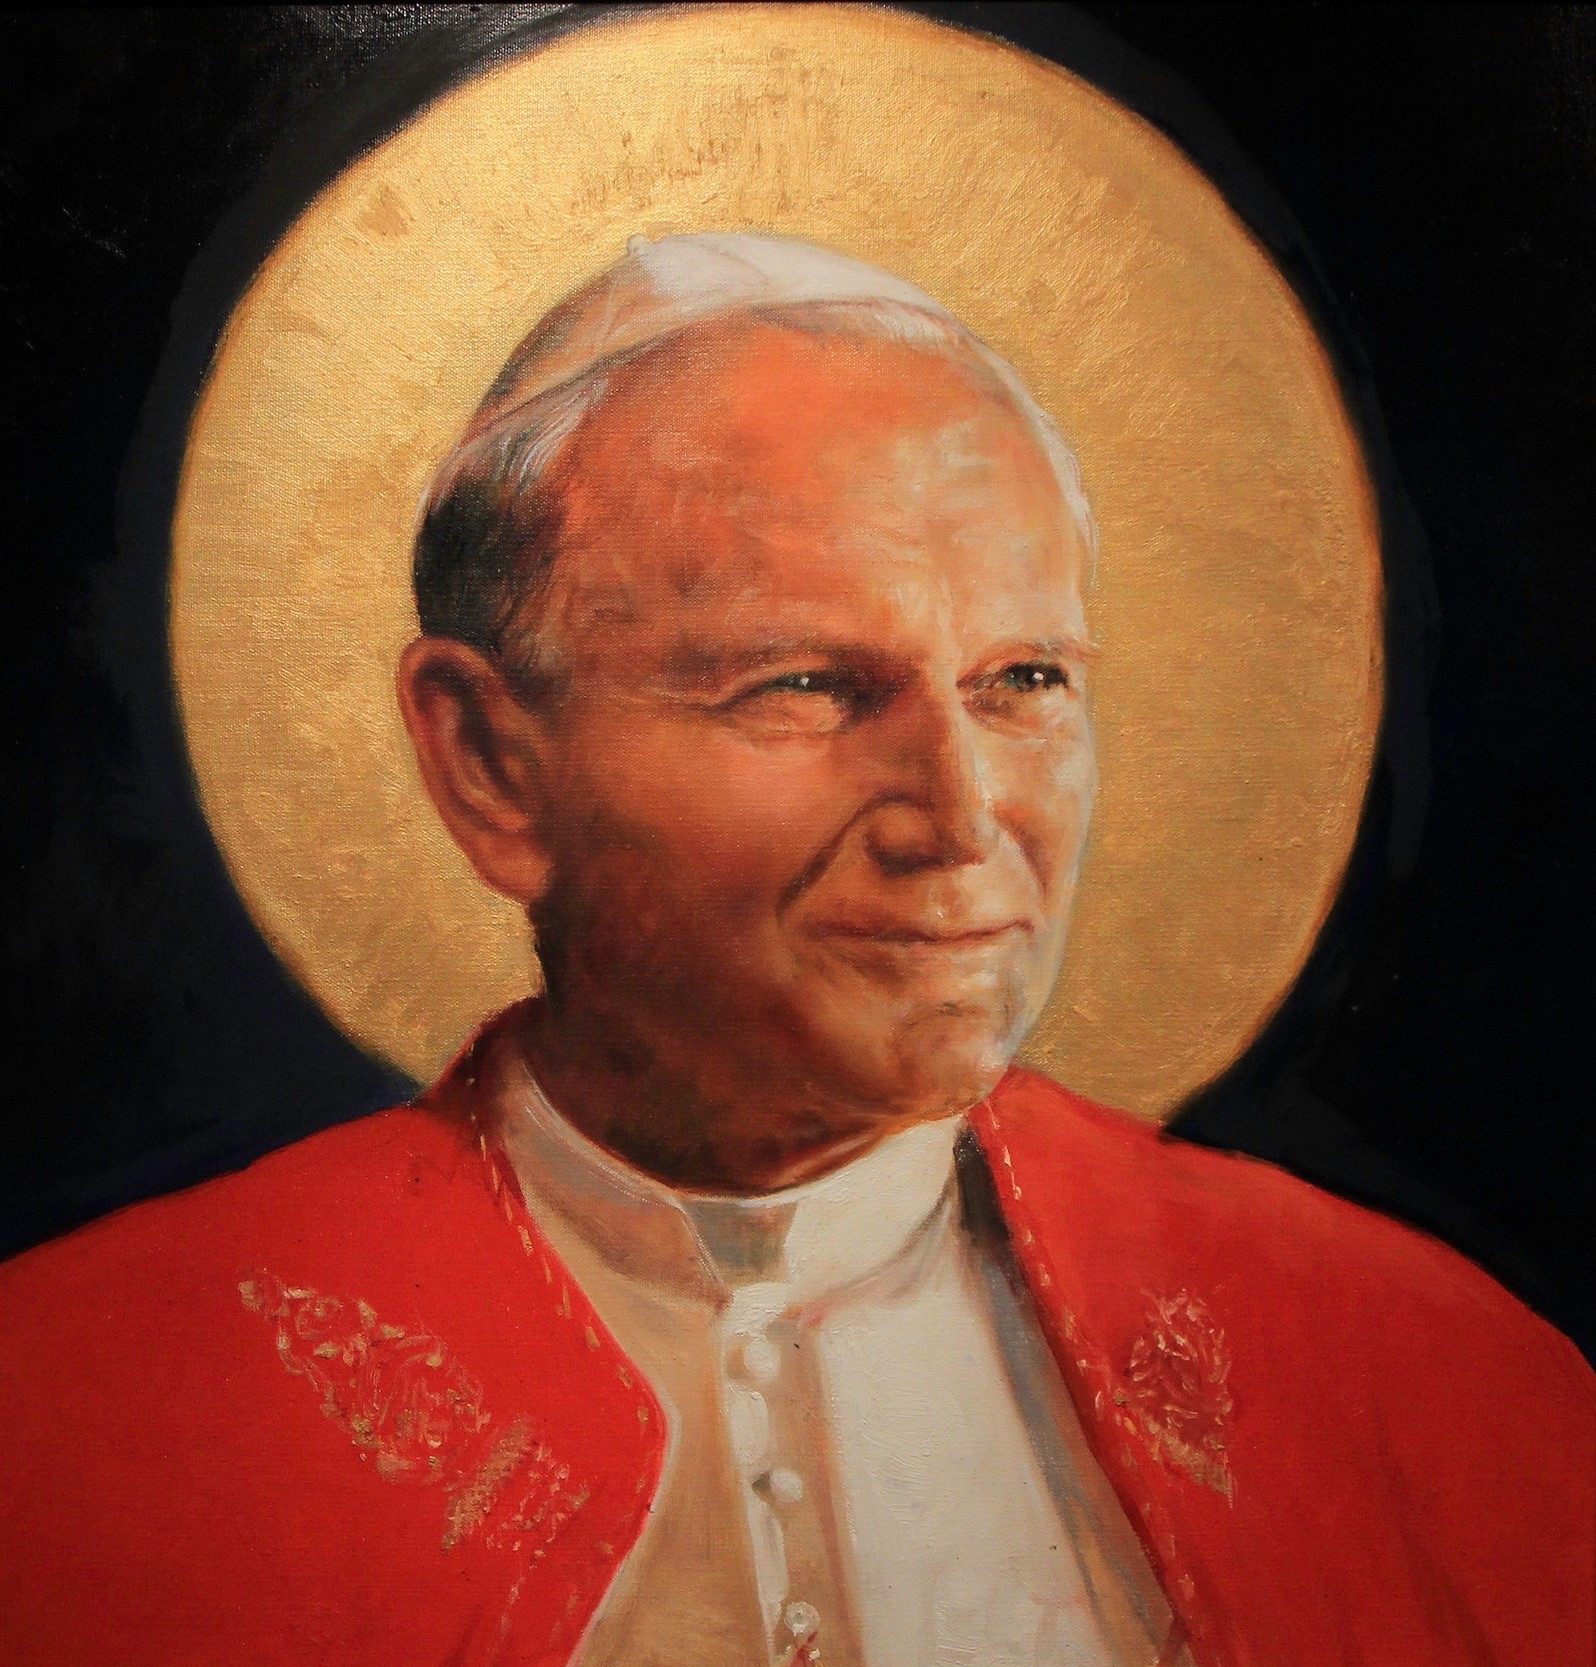 John Paul II: I Consecrate the Whole World to Your Immaculate Heart